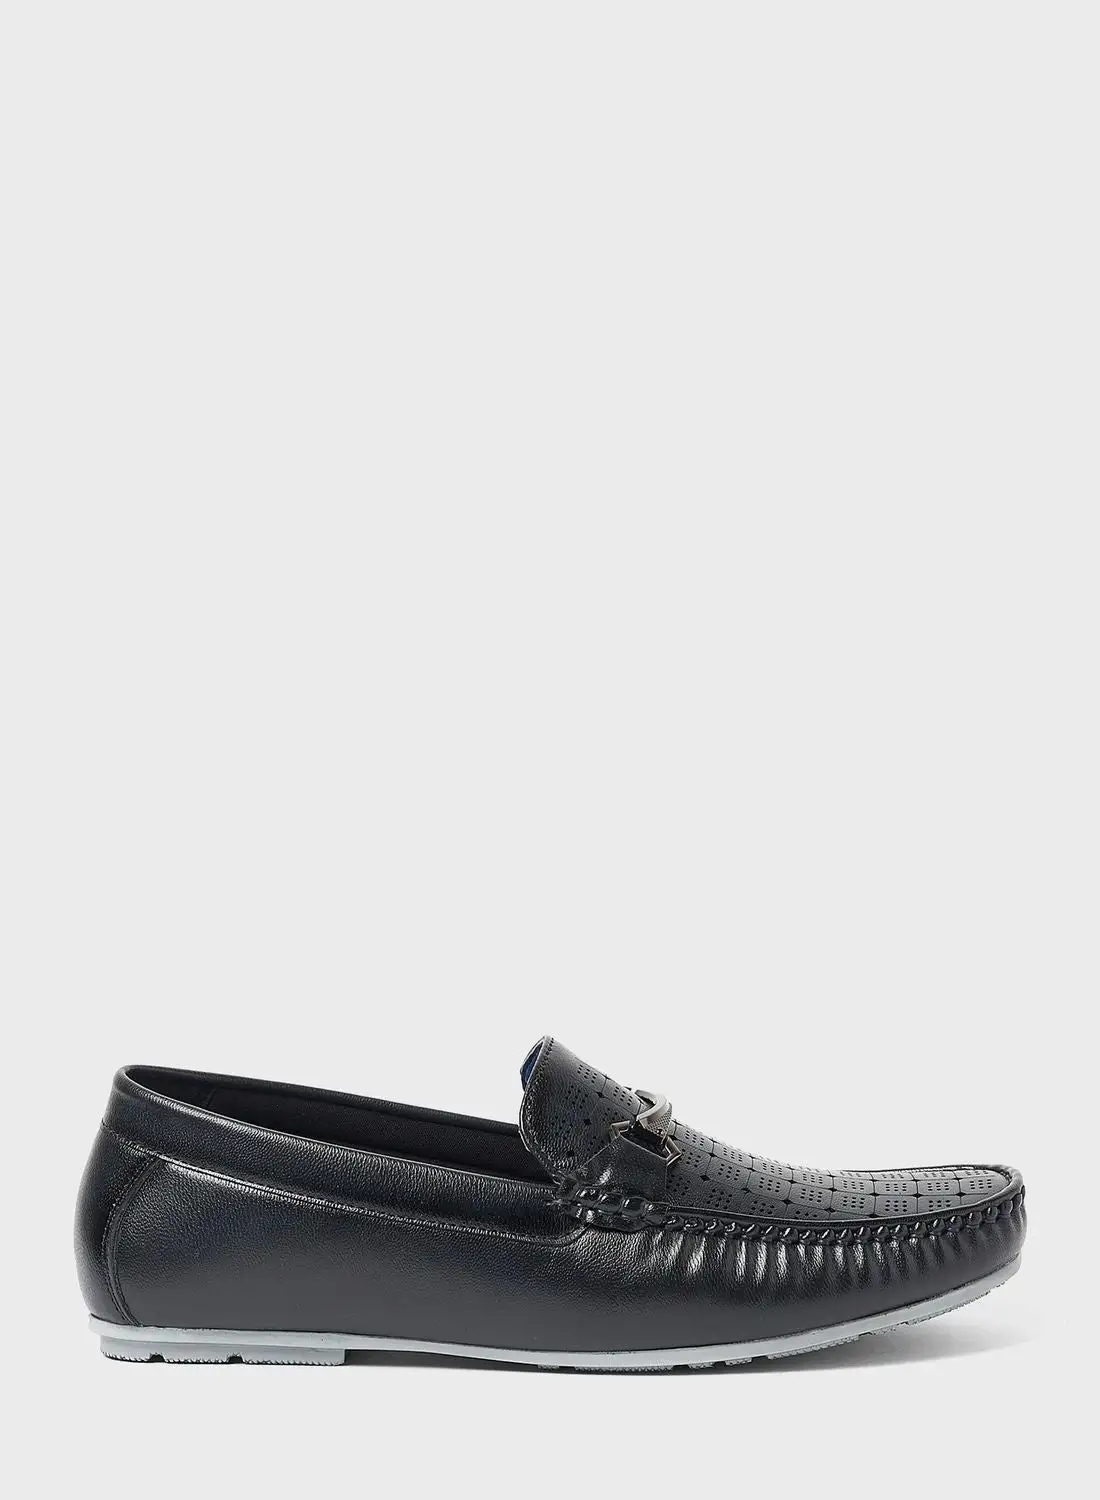 Geoomnii Casual Slip Ons Loafers